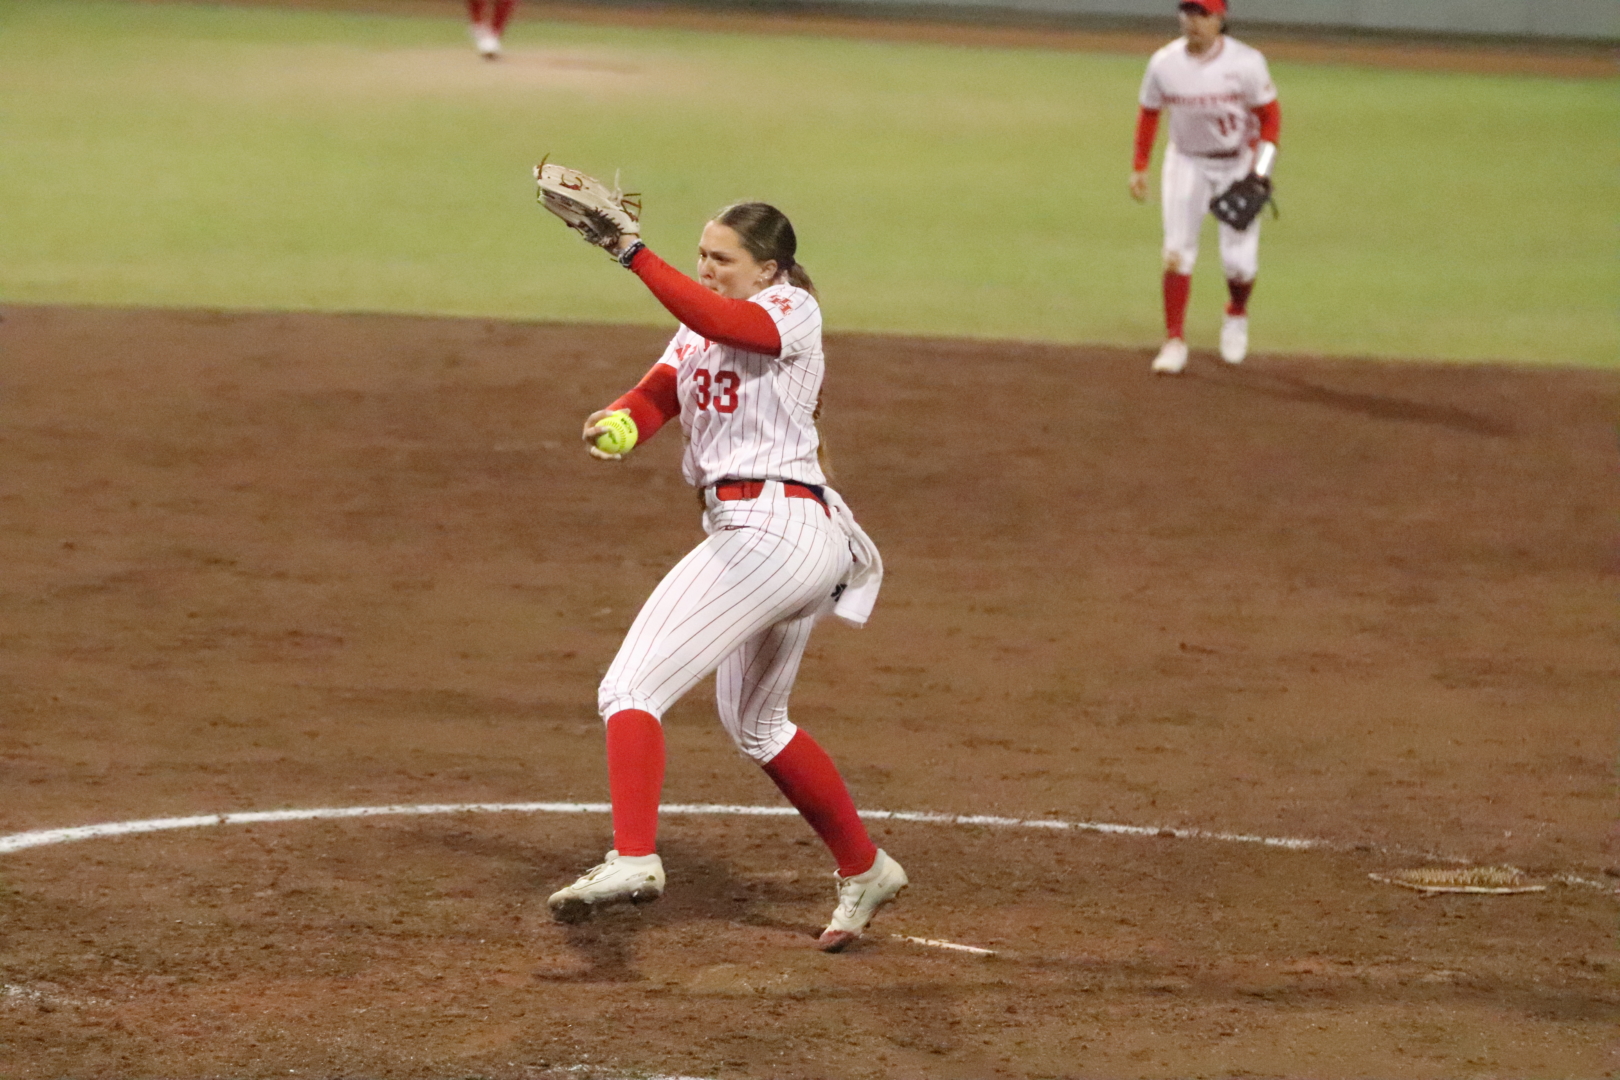 Kenna Wilkey tossed 13 shutout innings with 16 strikeouts for UH softball in her two starts against East Carolina over the weekend. | James Mueller/The Cougar